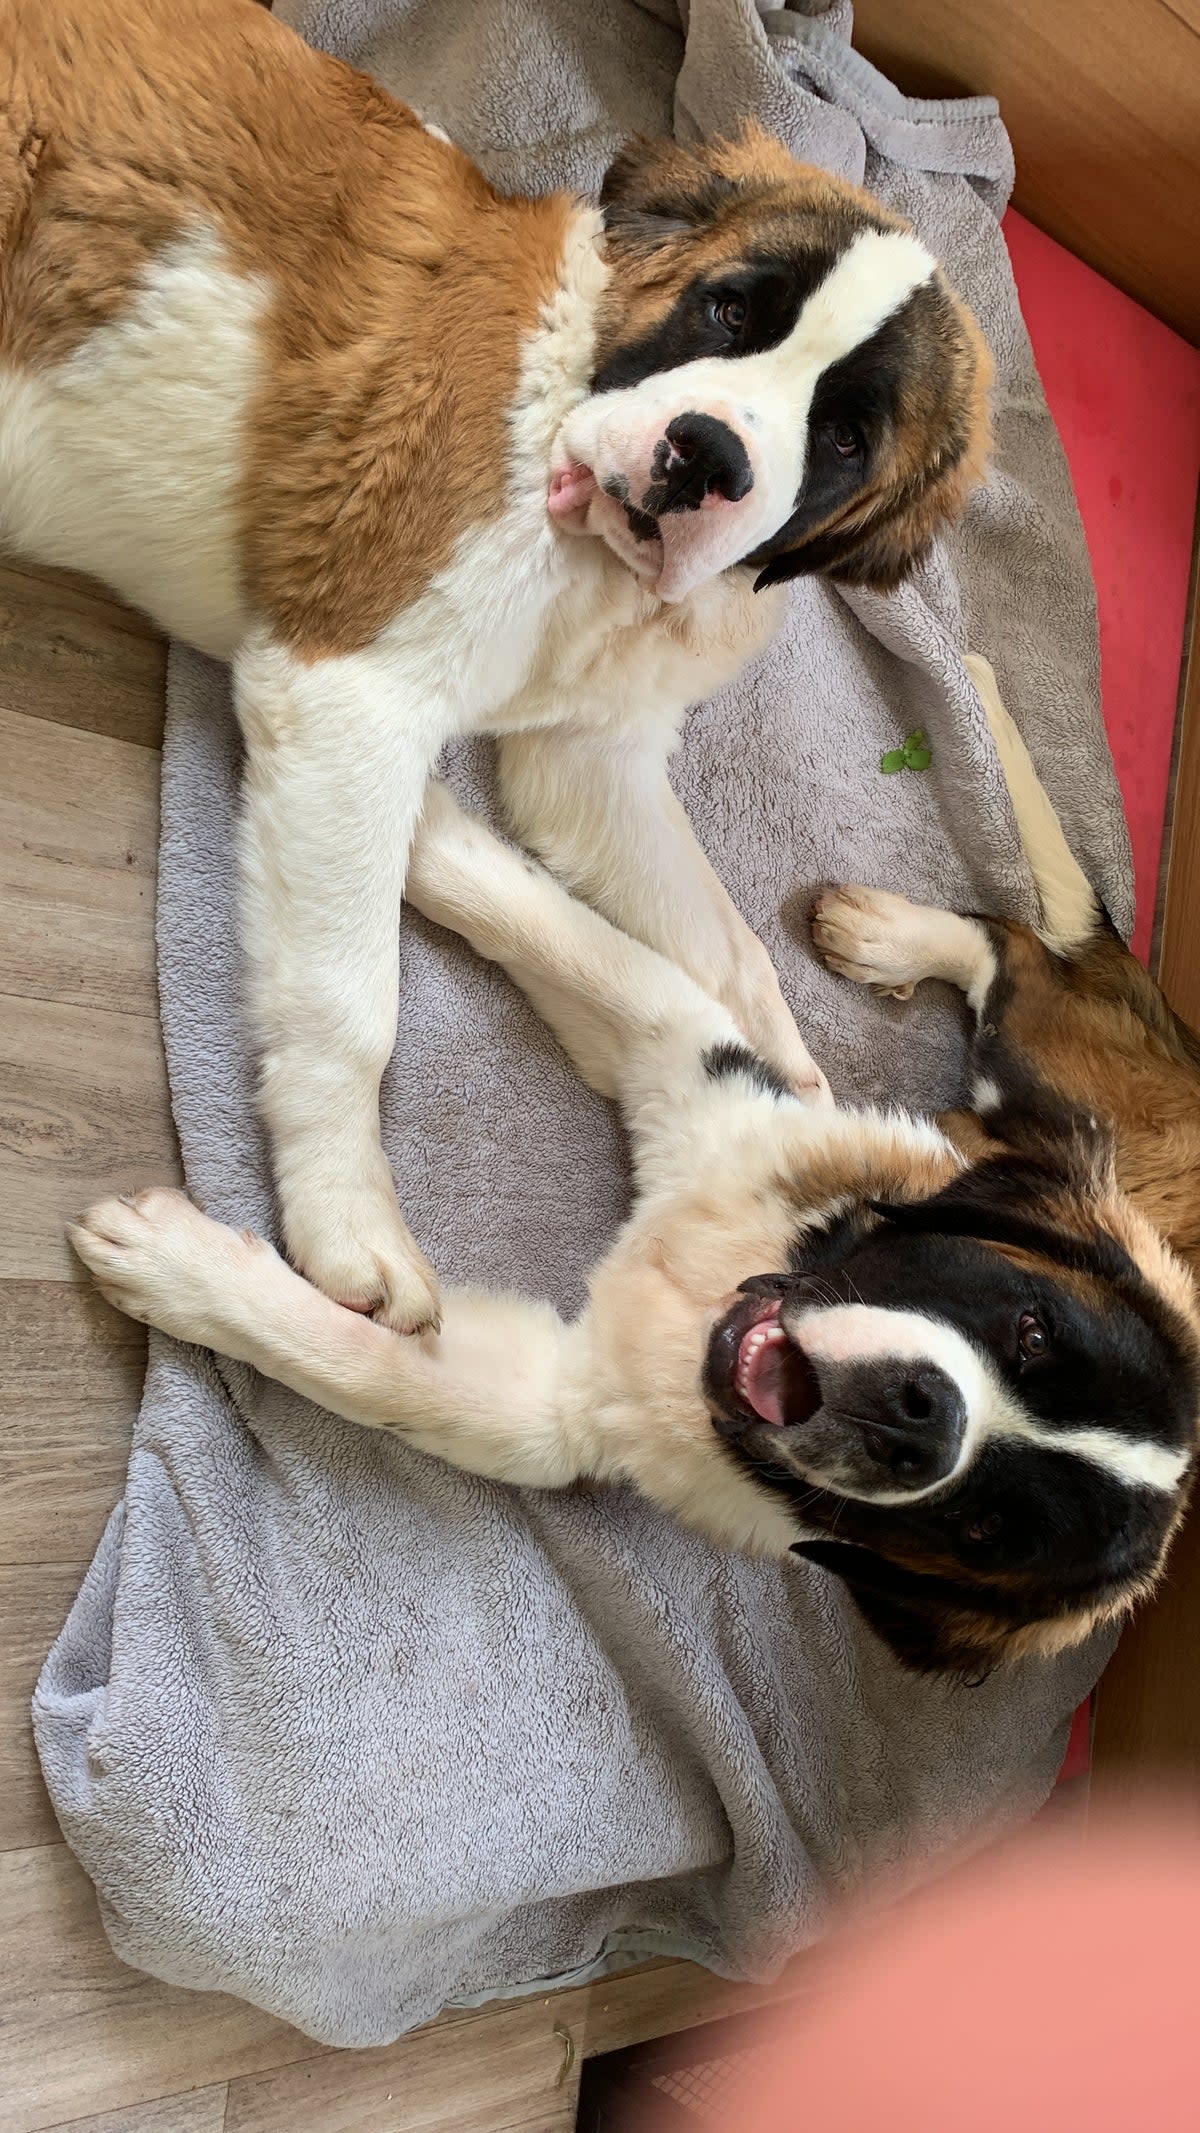 Rachel Adams was initially happy with her new St Bernard puppies. But after two attacks, she took the decision to have them put down (Courtesy Rachel Adams / SWNS)